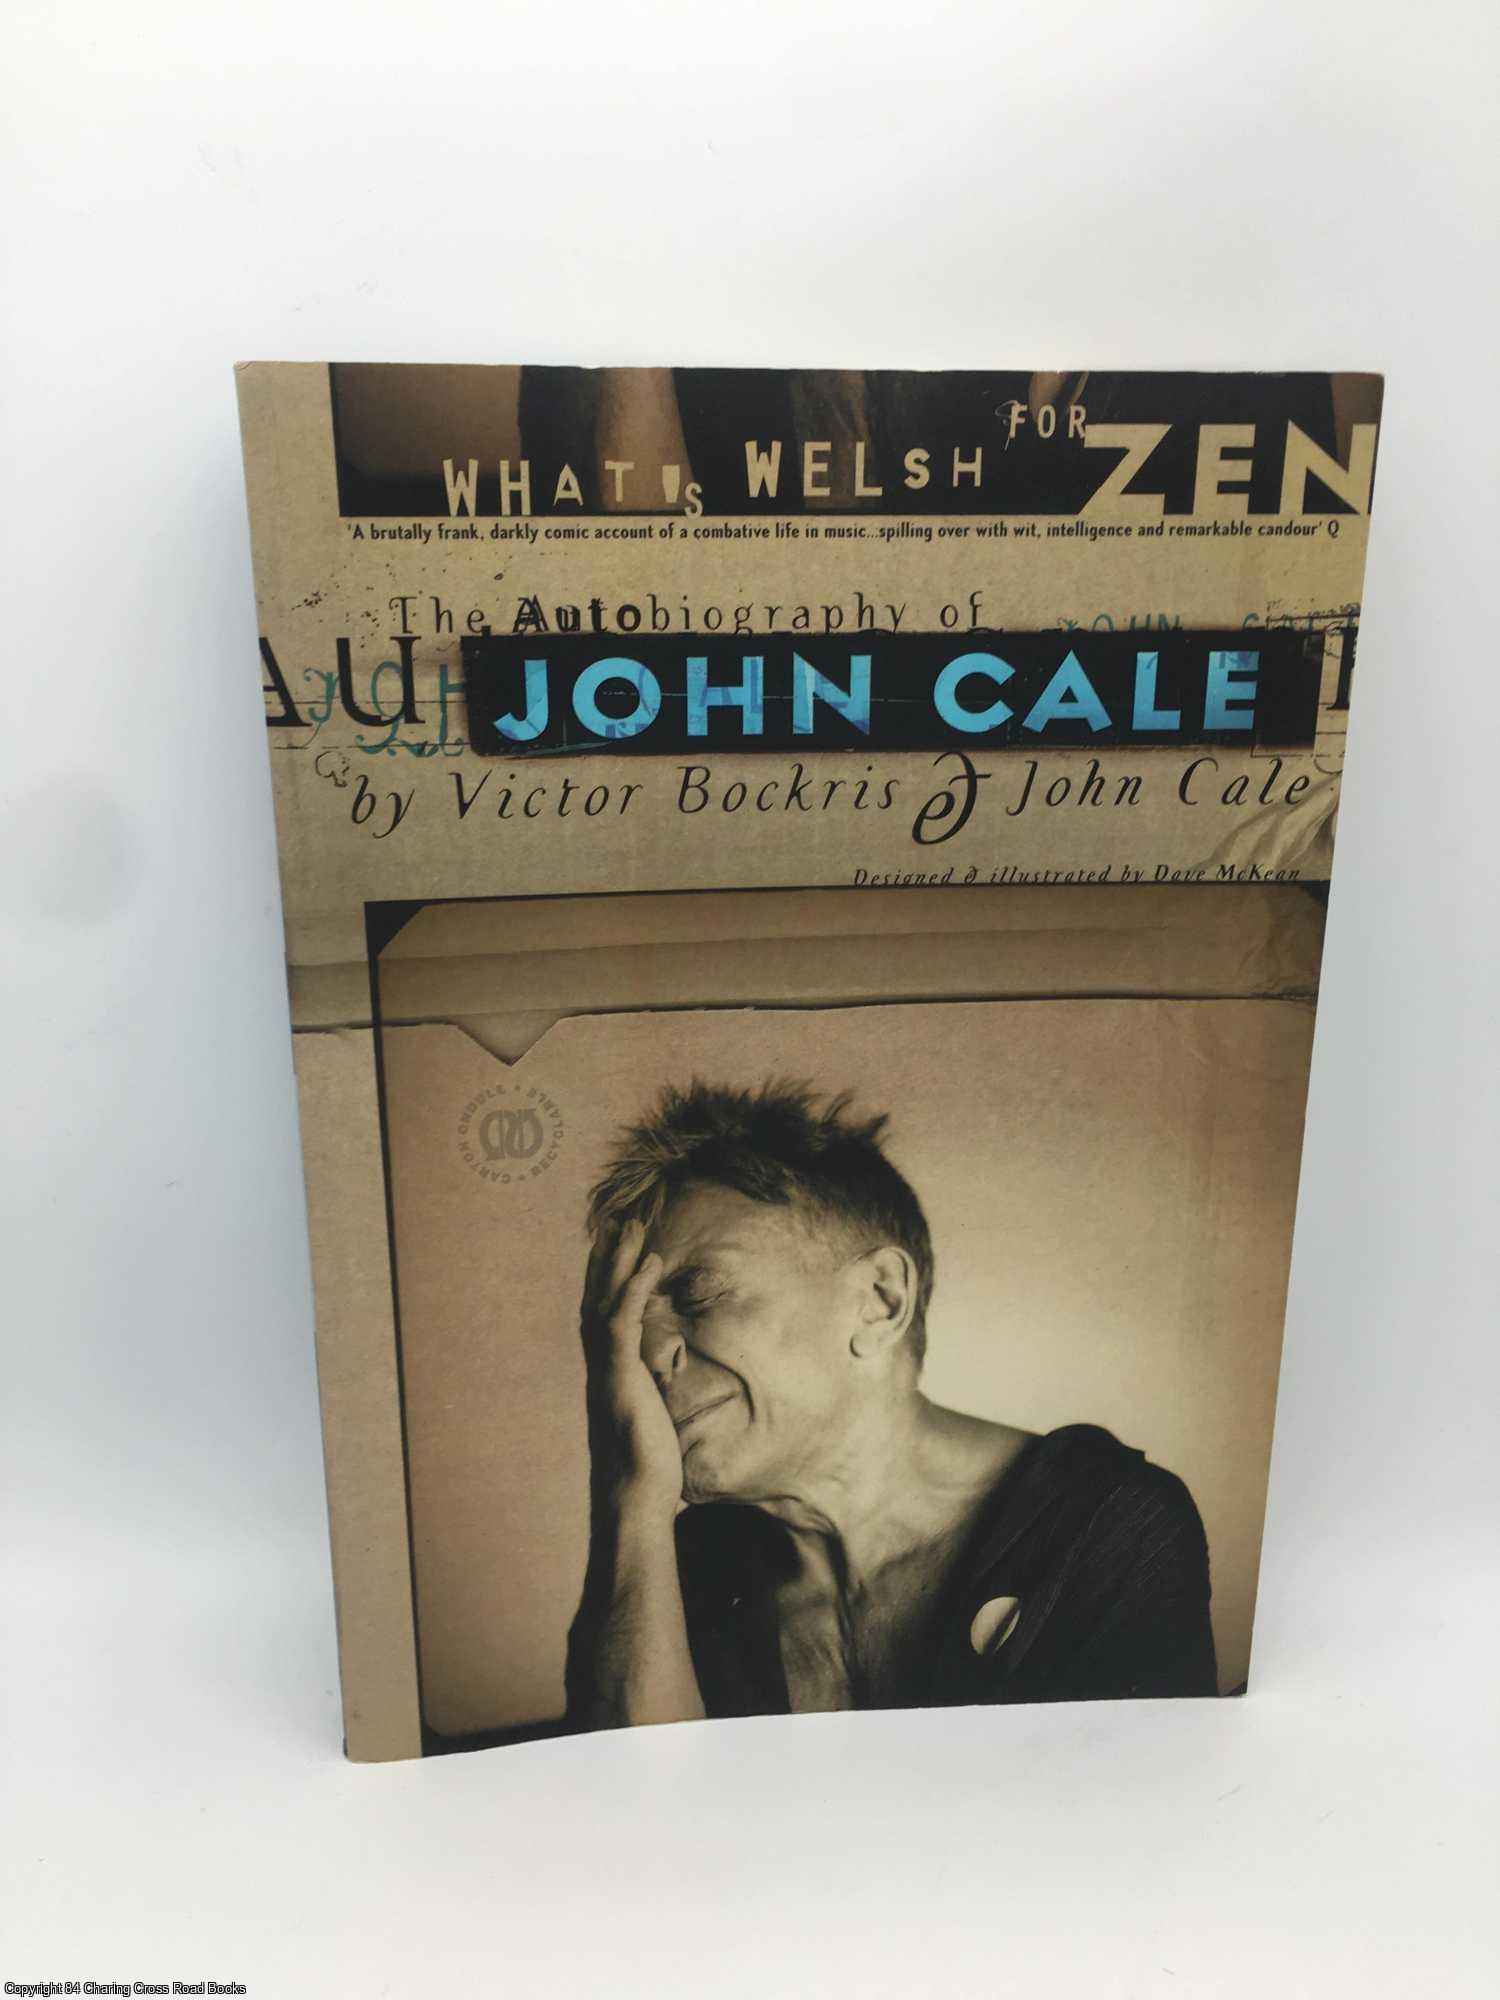 Cale, John - What's Welsh for Zen: Autobiography of John Cale